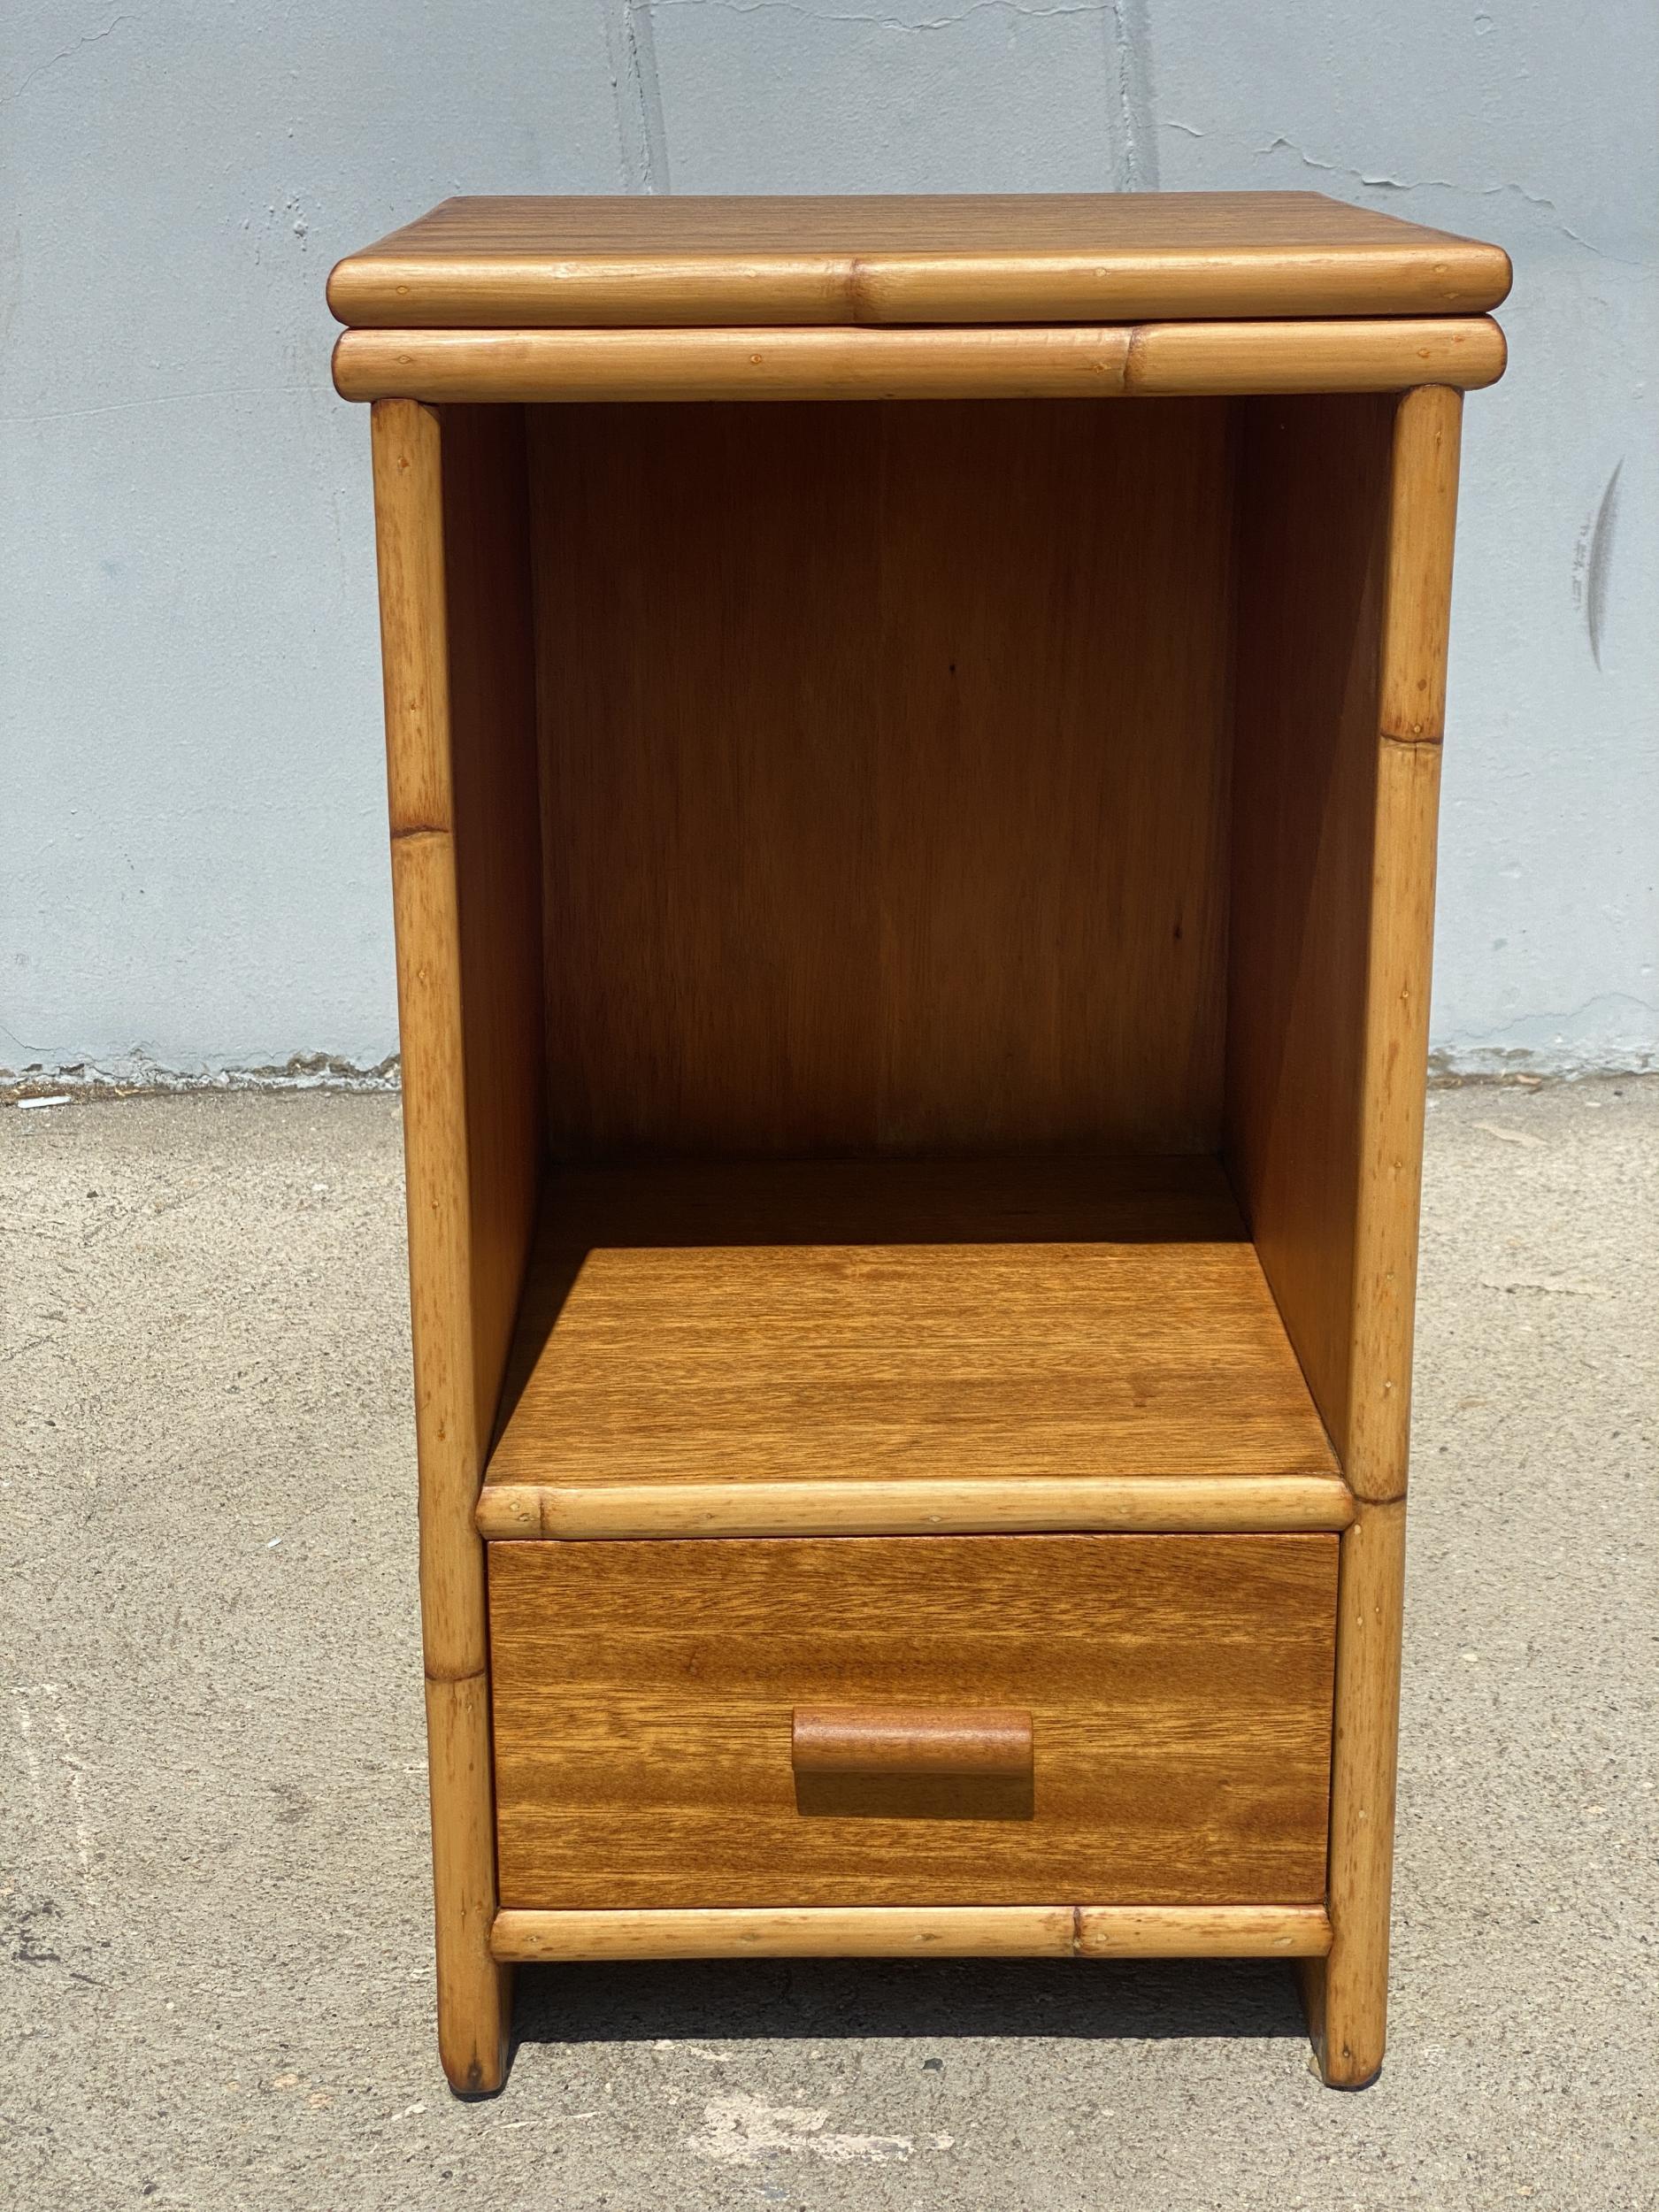 Restored post-war mahogany bedside table with single drawer and cubby space.

Restored to new for you.

All rattan, bamboo, and wicker furniture has been painstakingly refurbished to the highest standards with the best materials. All refinishing